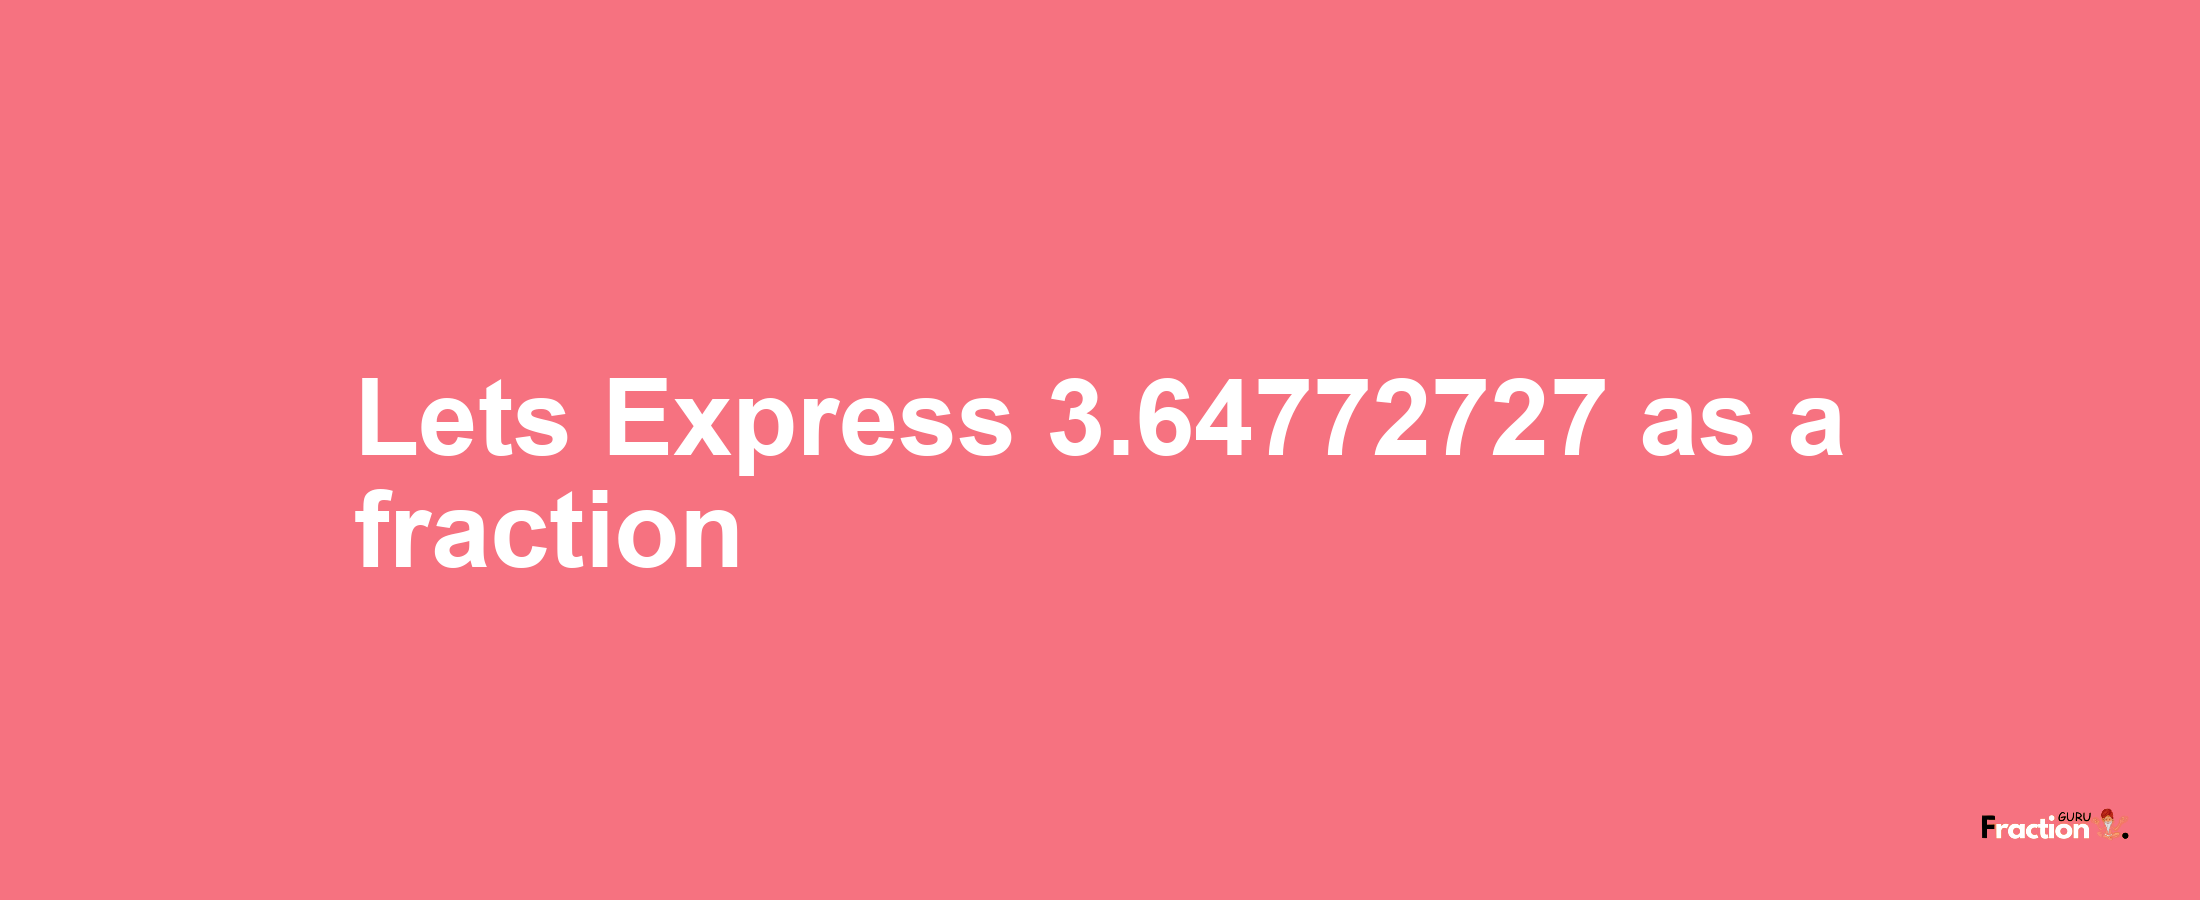 Lets Express 3.64772727 as afraction